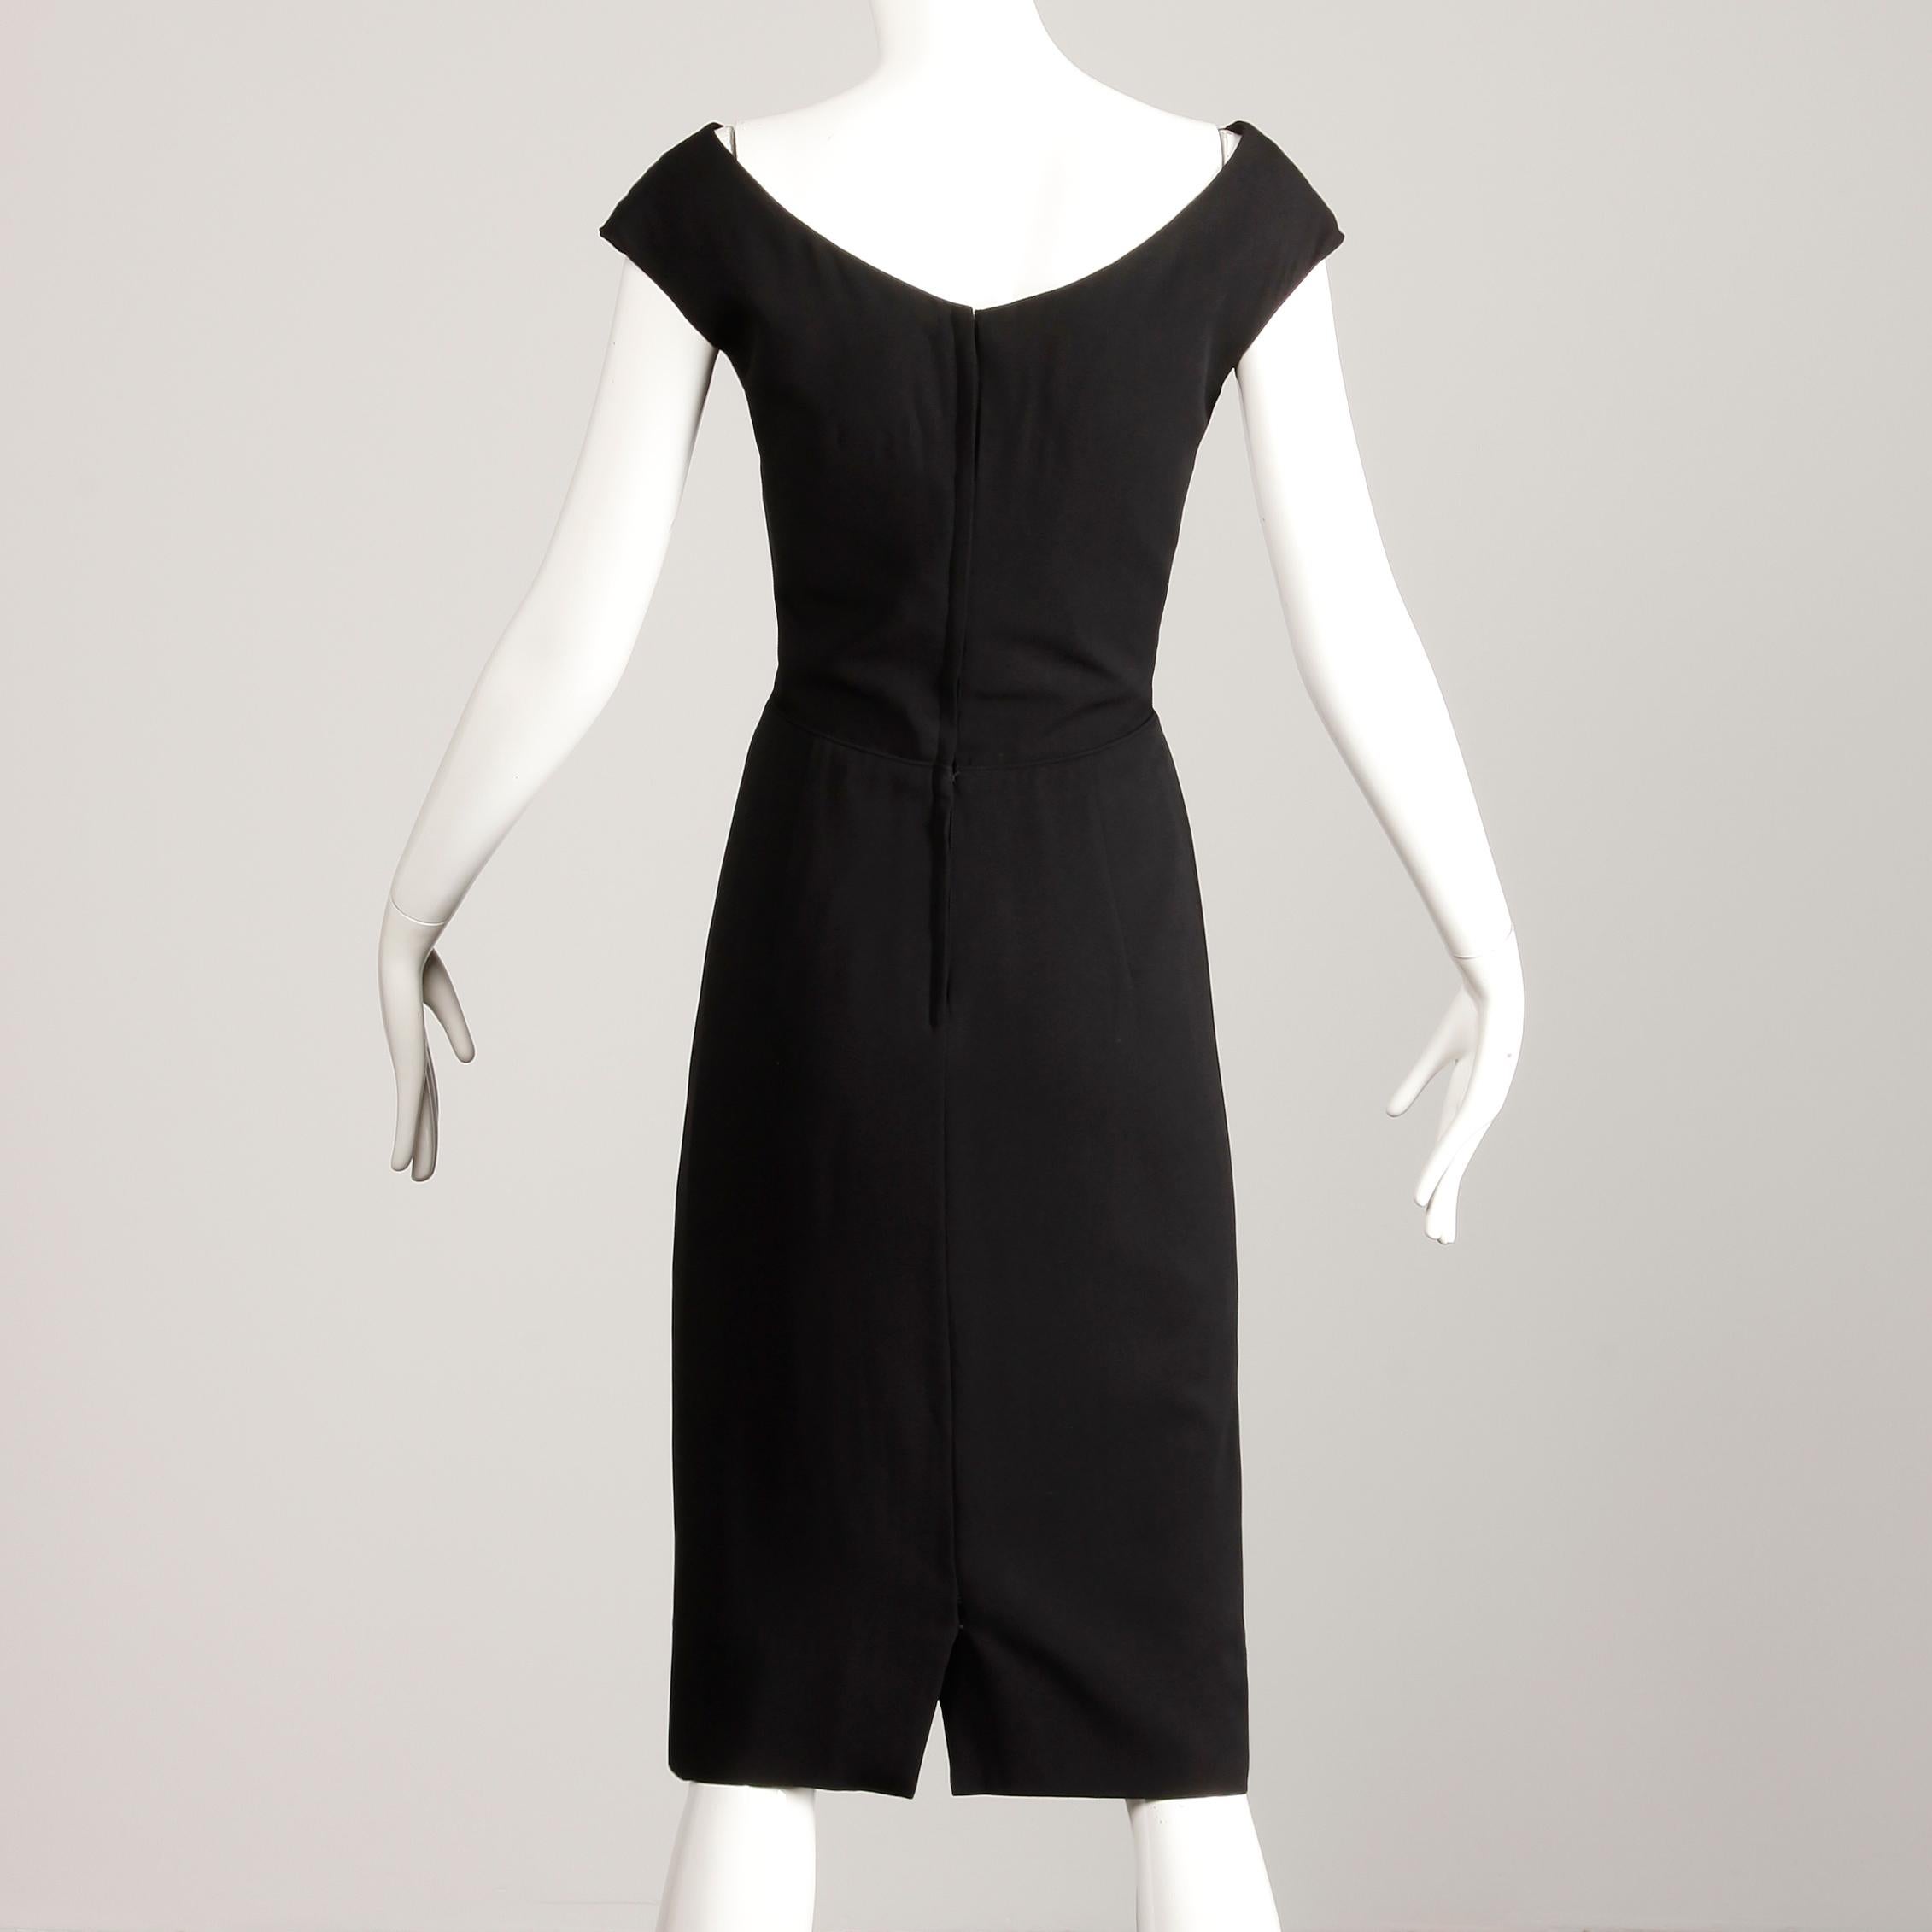 1950s Dorothy O'Hara Vintage Black Asymmetric Cocktail Sheath Dress  In Excellent Condition For Sale In Sparks, NV